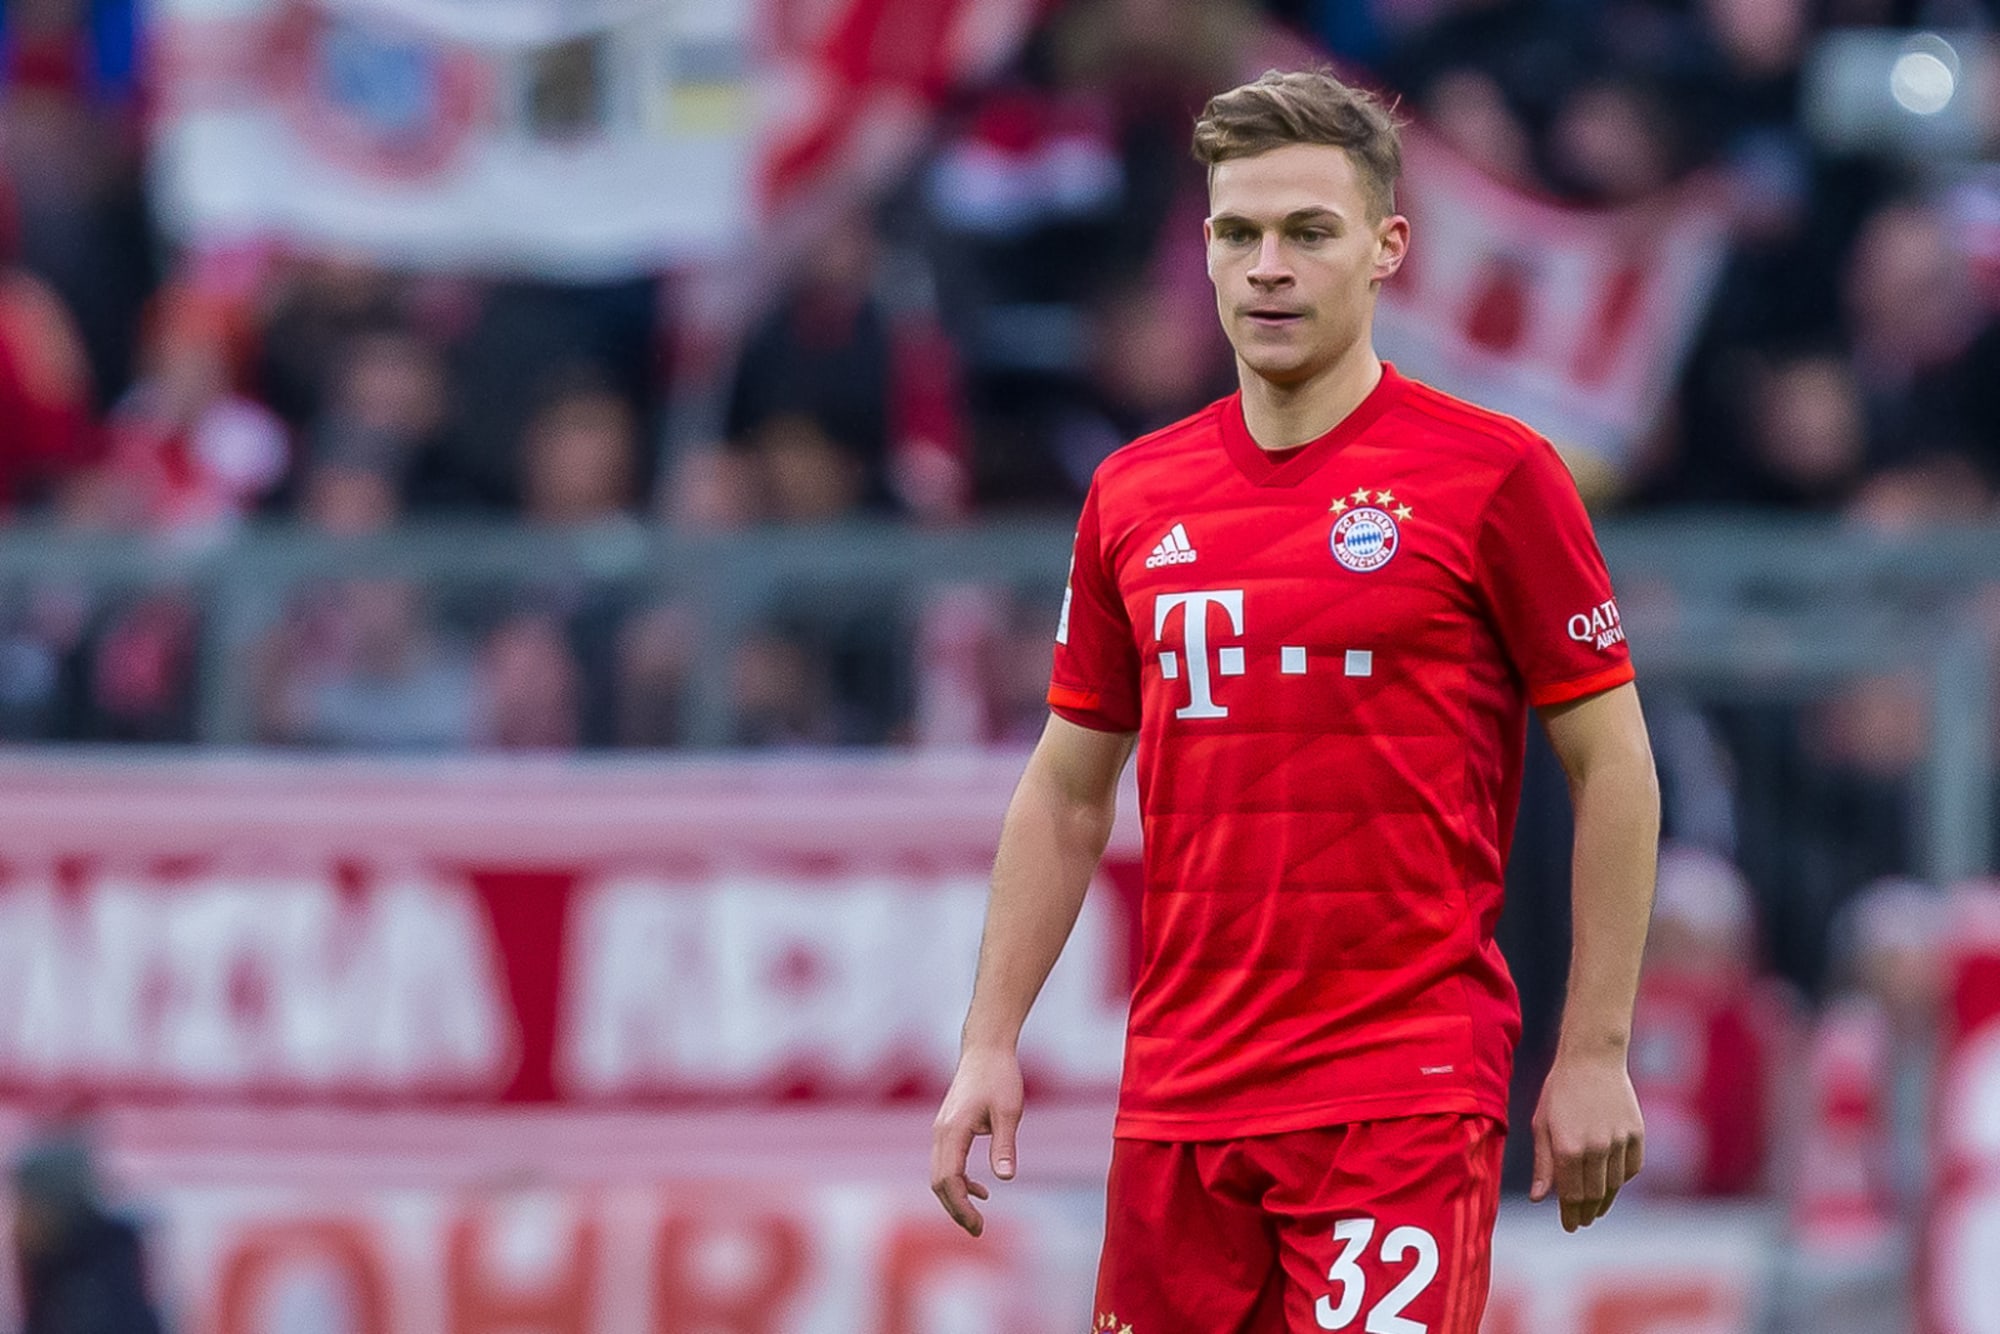  Joshua Kimmich is playing soccer for Bayern Munich, wearing a red jersey with white stripes on the sleeves and red shorts.